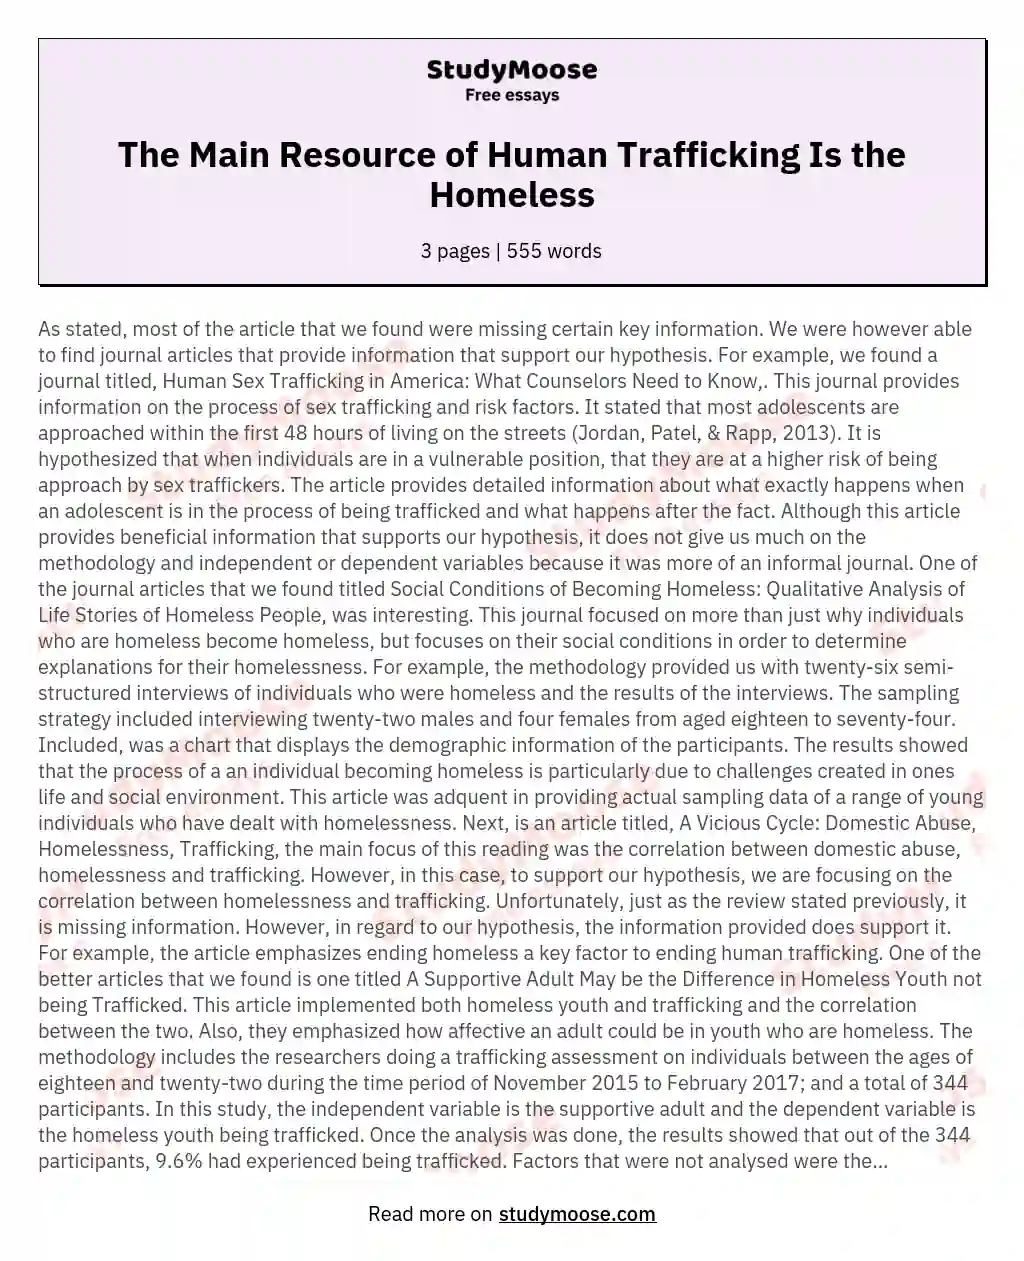 The Main Resource of Human Trafficking Is the Homeless essay